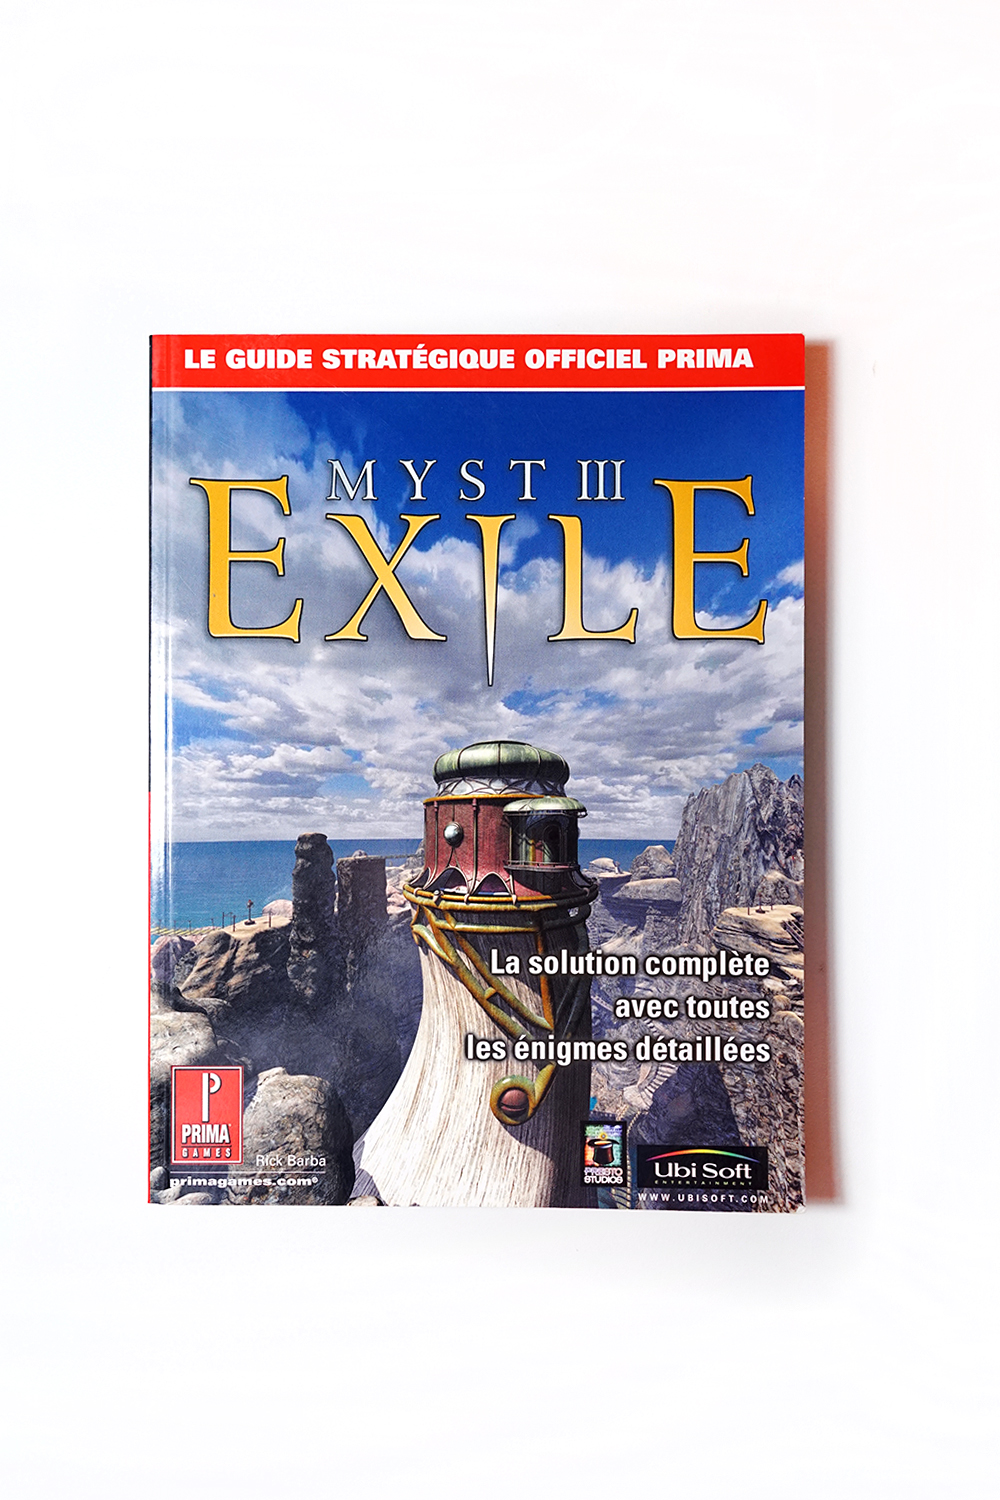 myst 3 exile guide